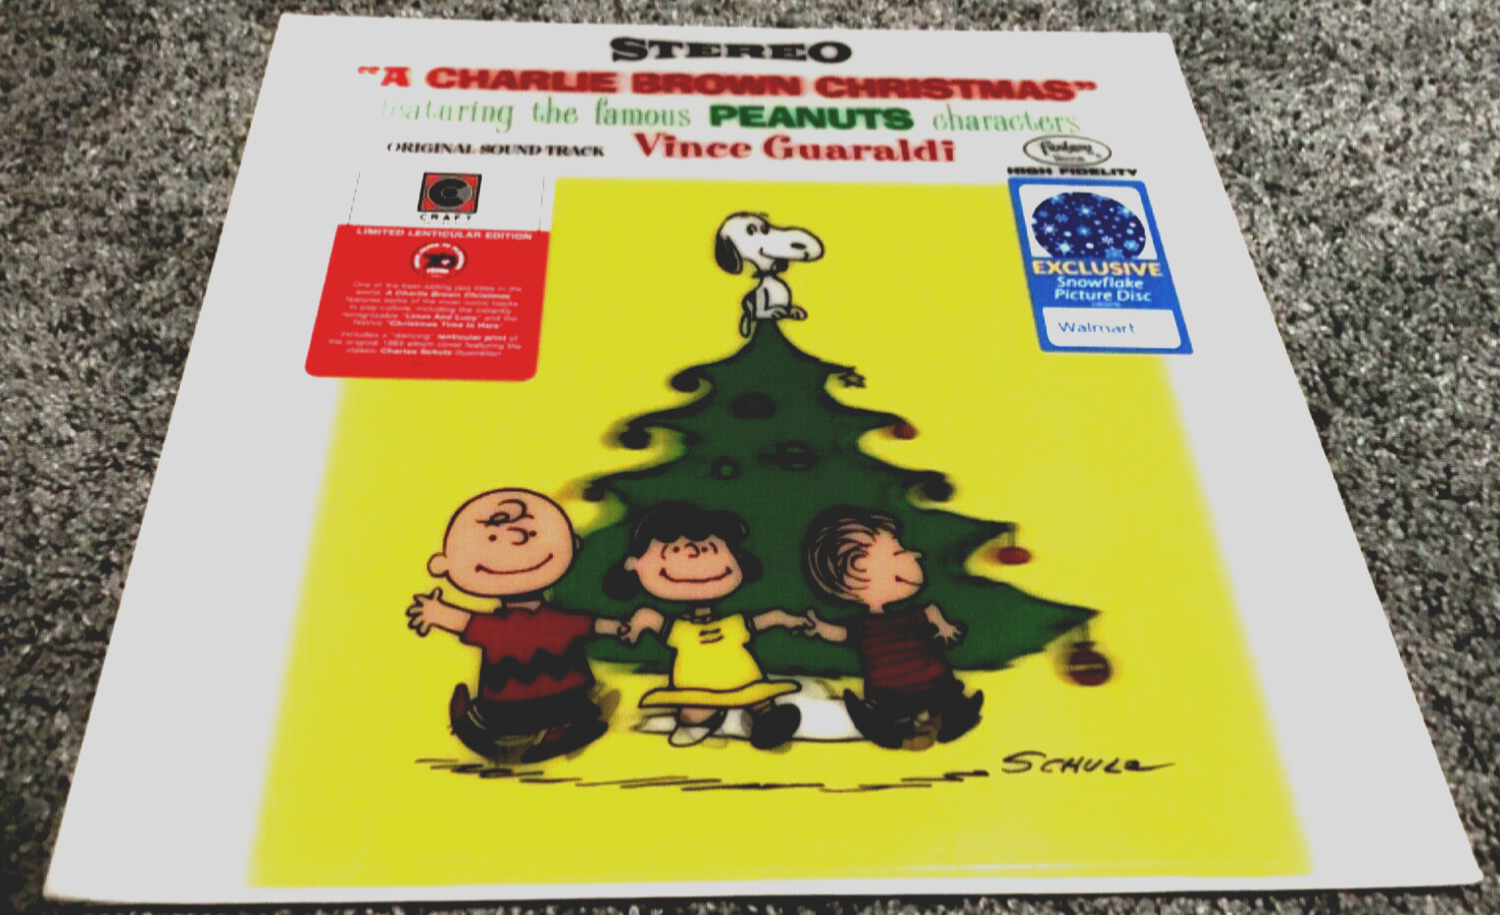 A Charlie Brown Christmas Rare Snowflake Picture Disc Lenticular Vinyl LP - New